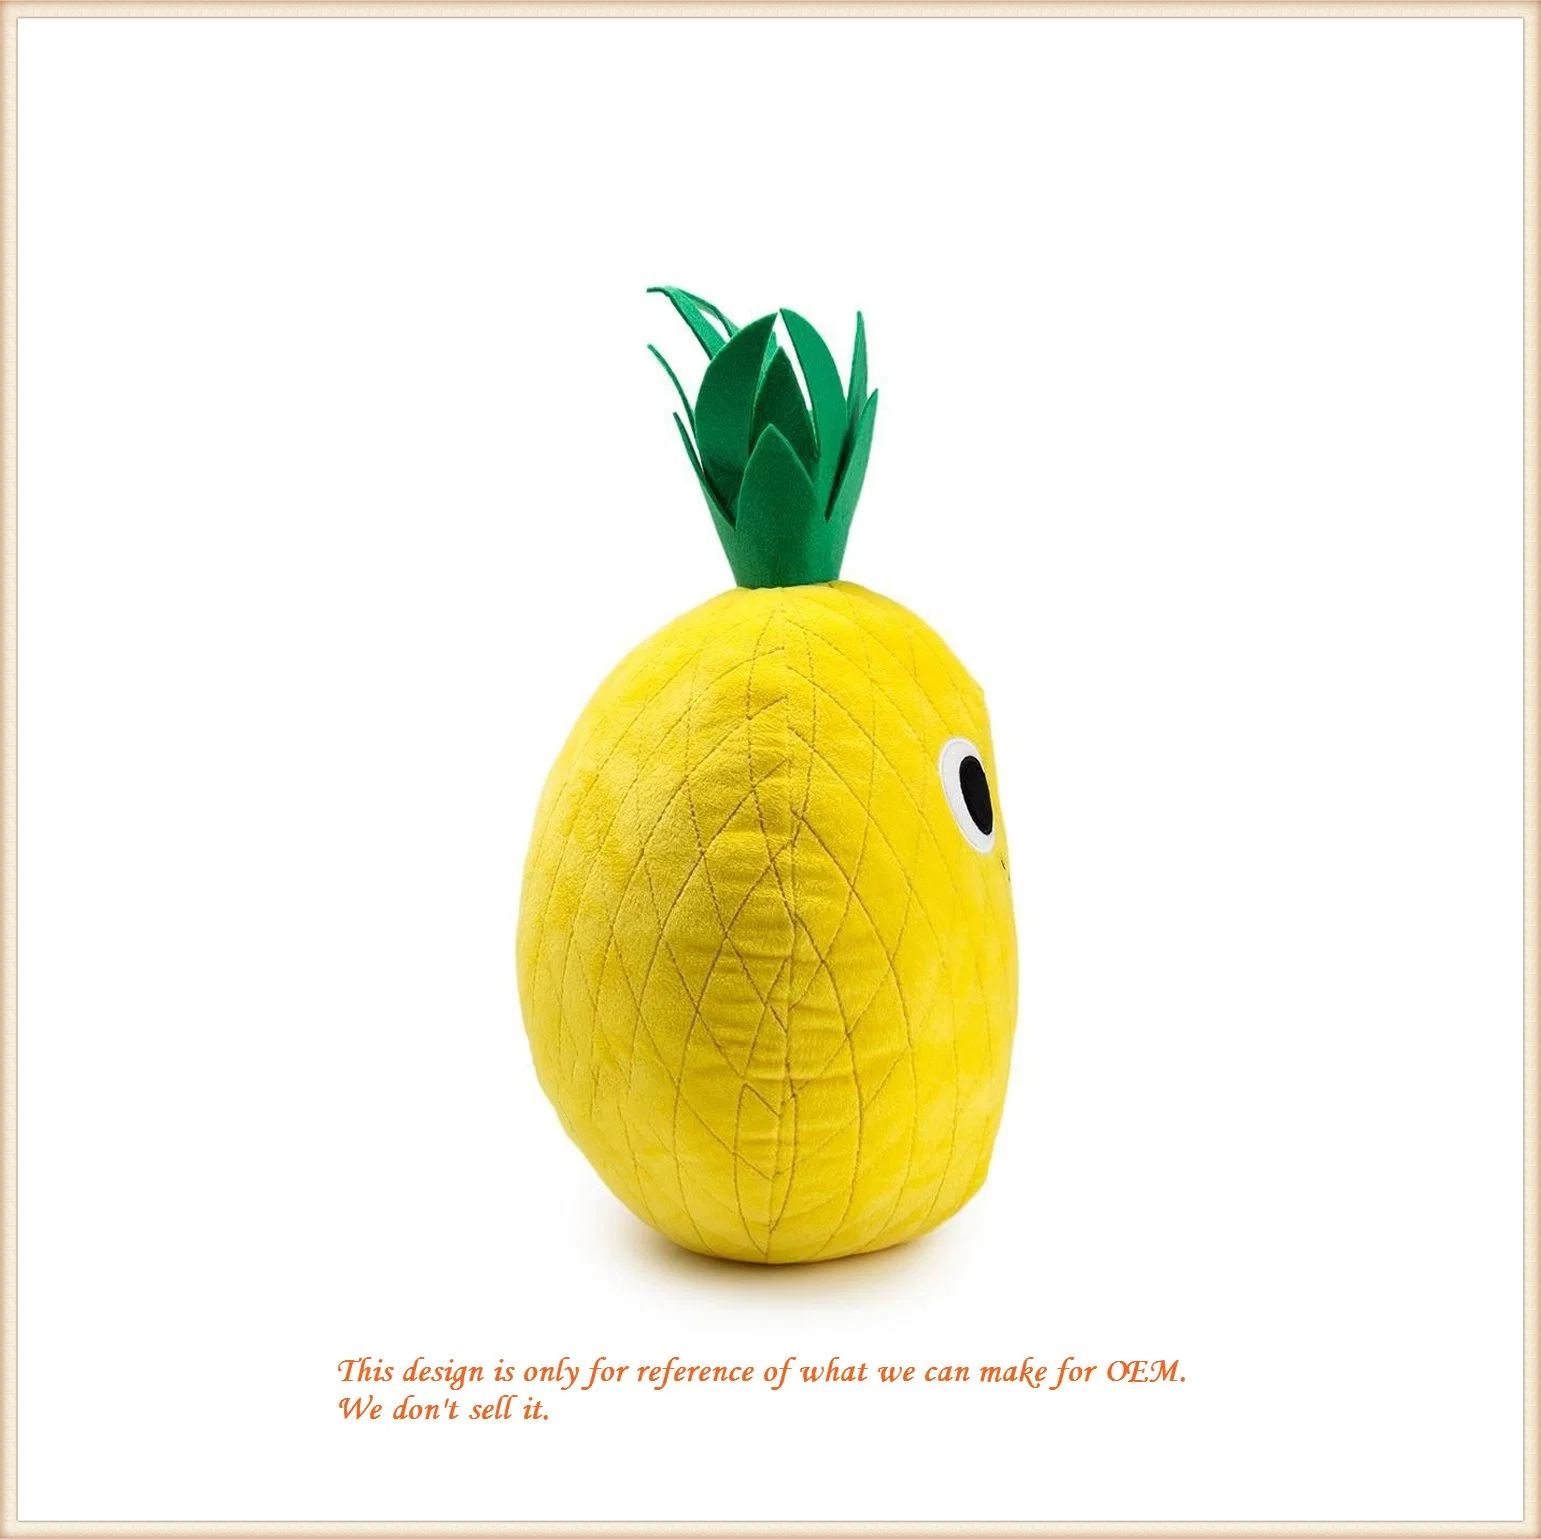 Soft Toys of Pear Pillow/ Pear Cushion for Baby Cuddly Toys/ Fruit Plush Toys of OEM/ Custom Toys